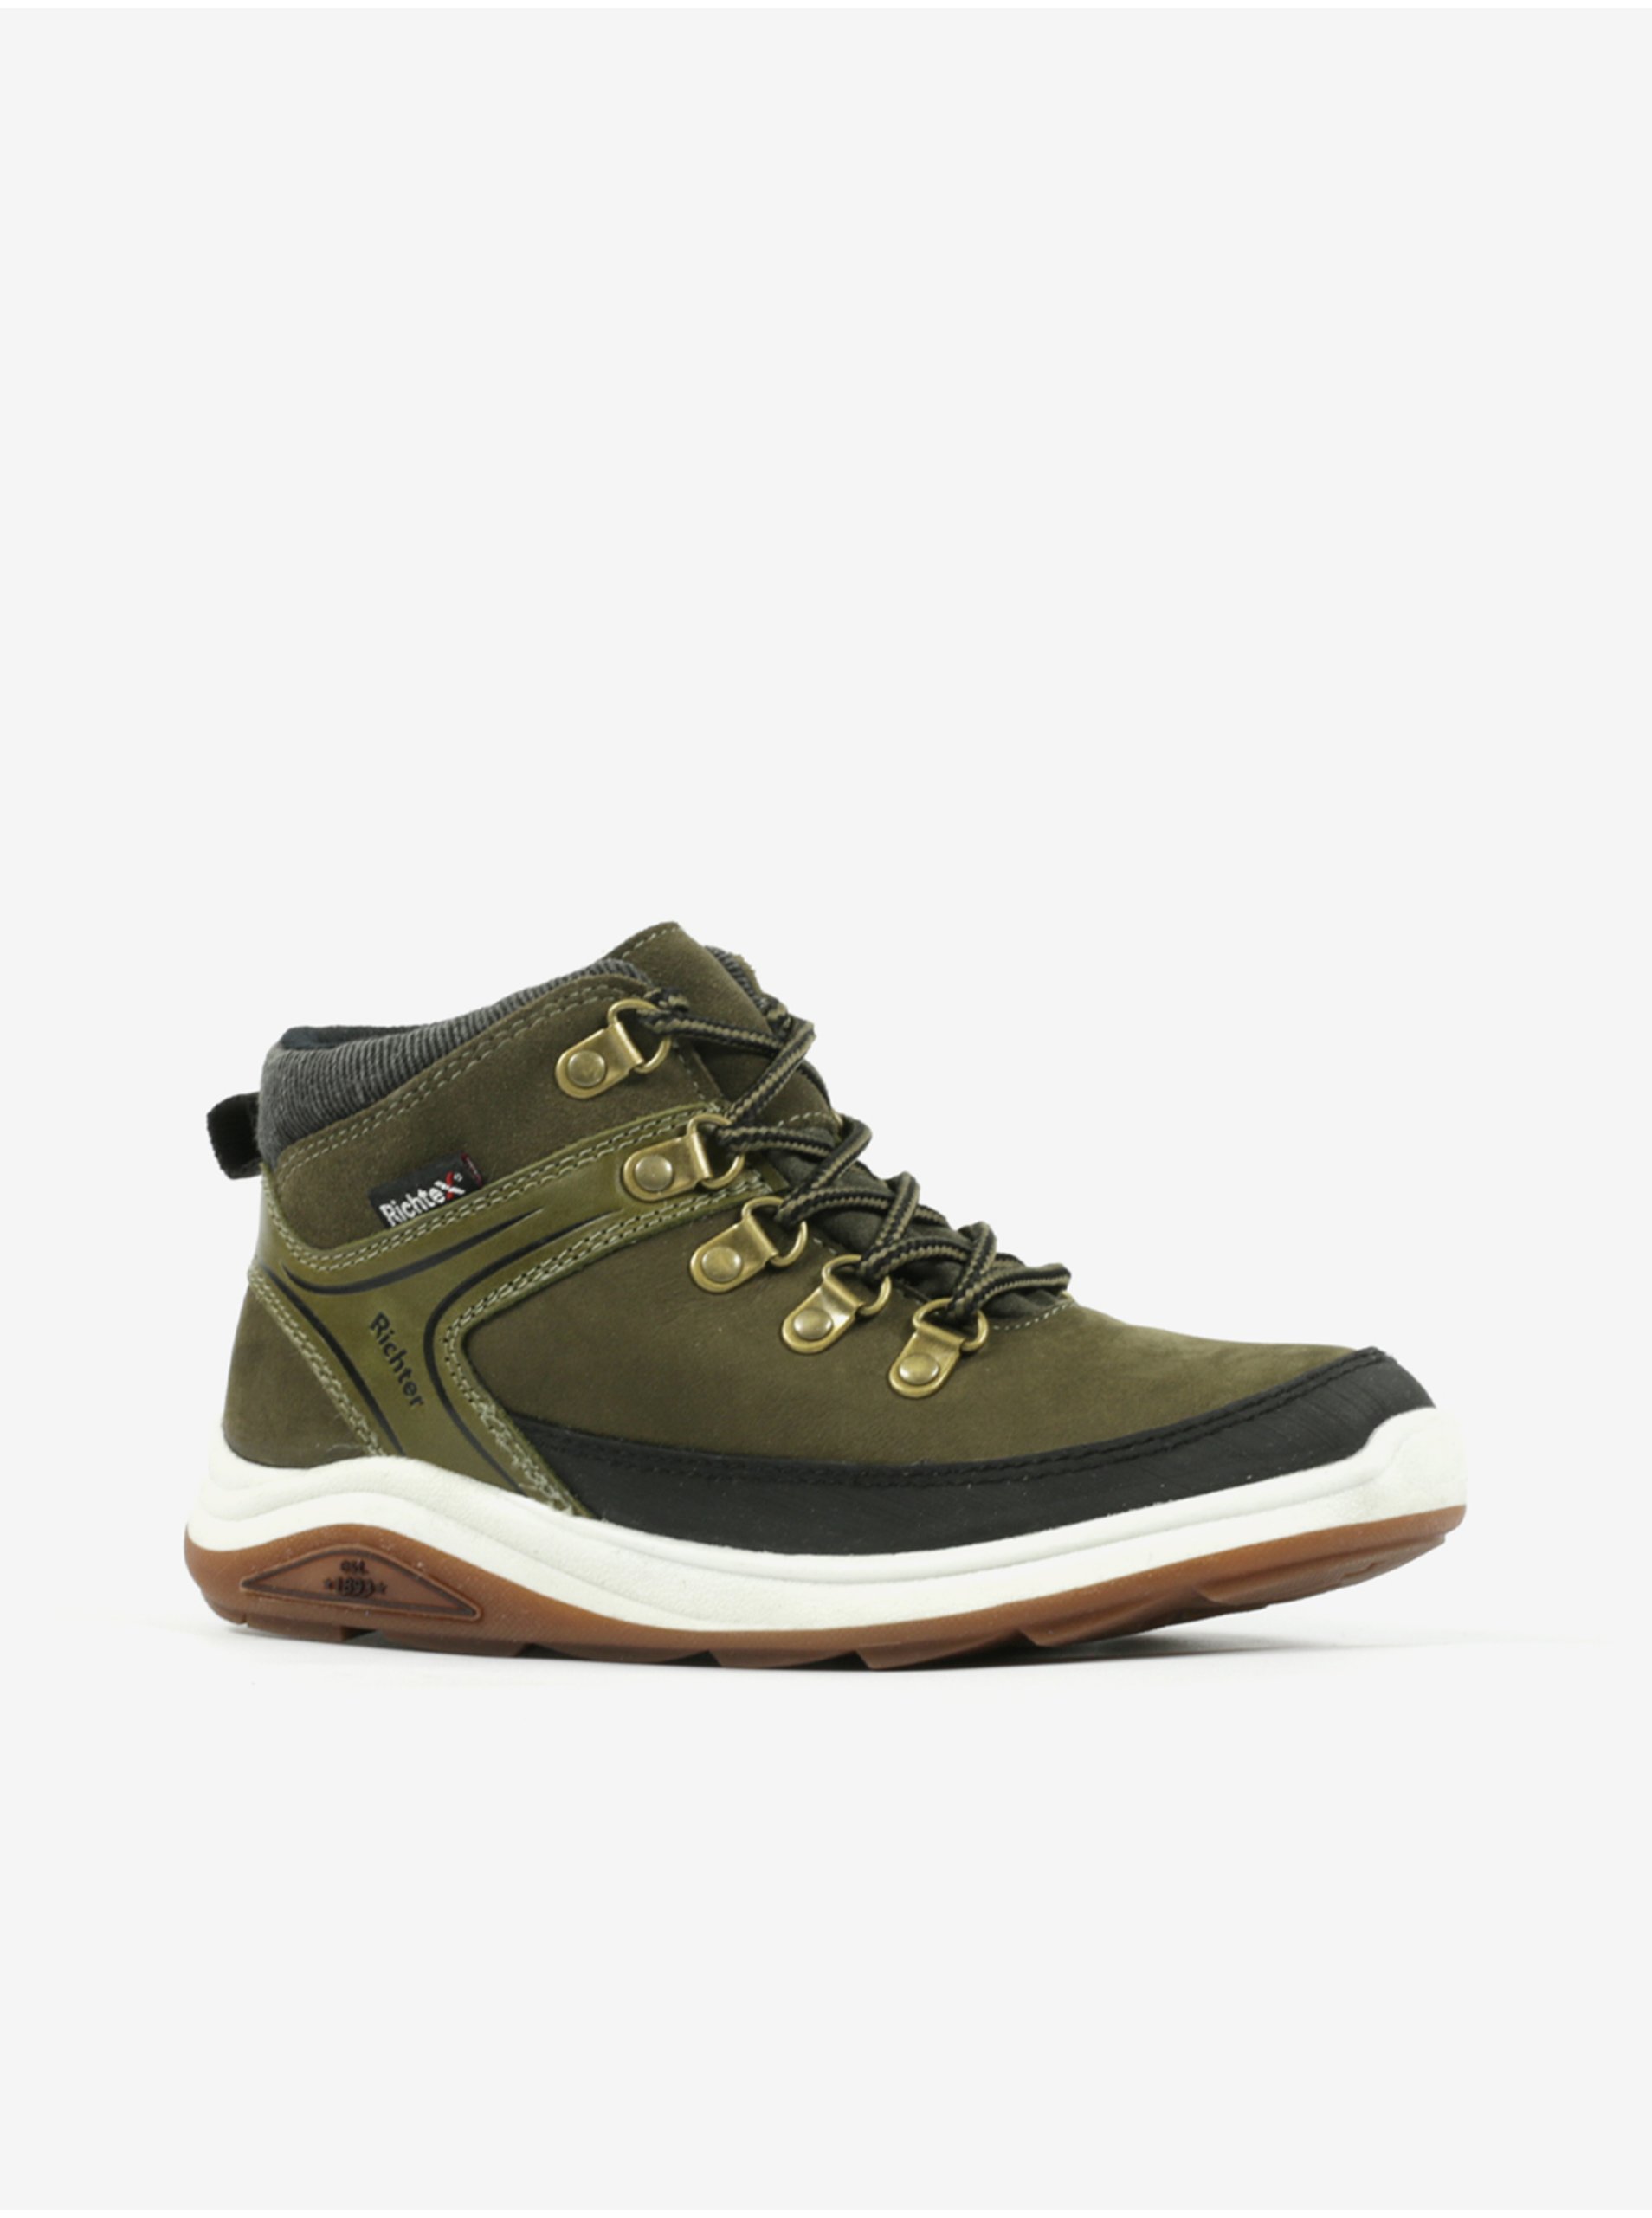 Green Boys Ankle Leather Winter Boots Richter - Boys